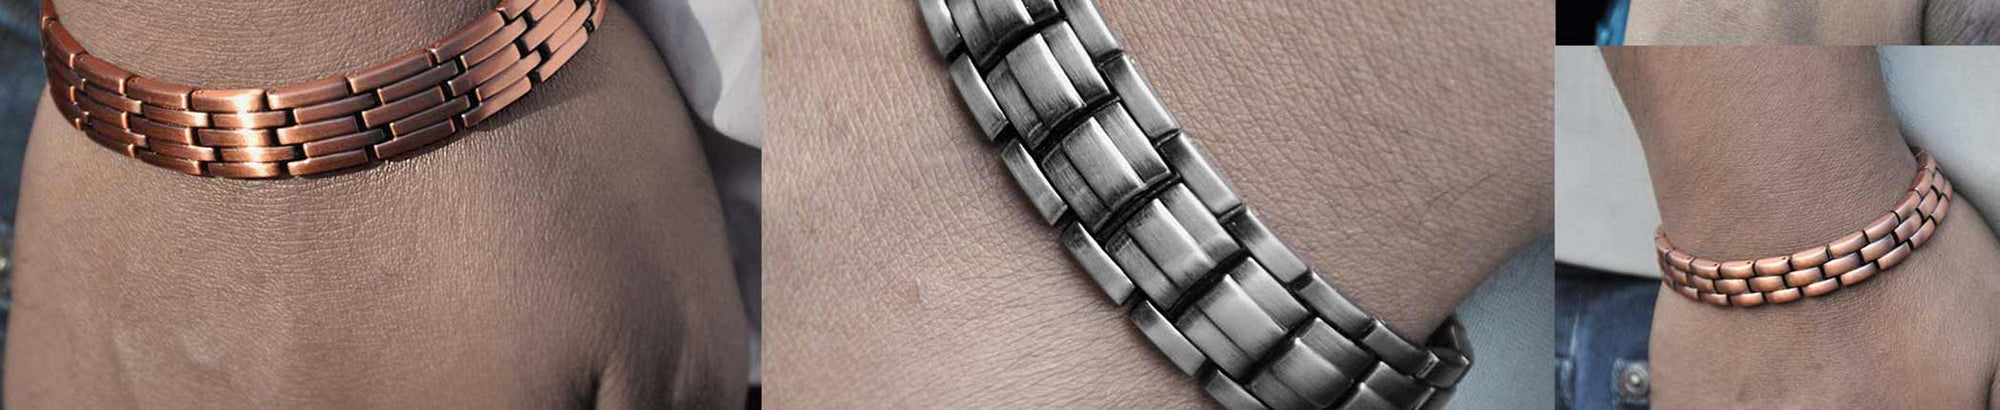 How do you clean magnetic bracelets? Top 10 magnetic wristbands